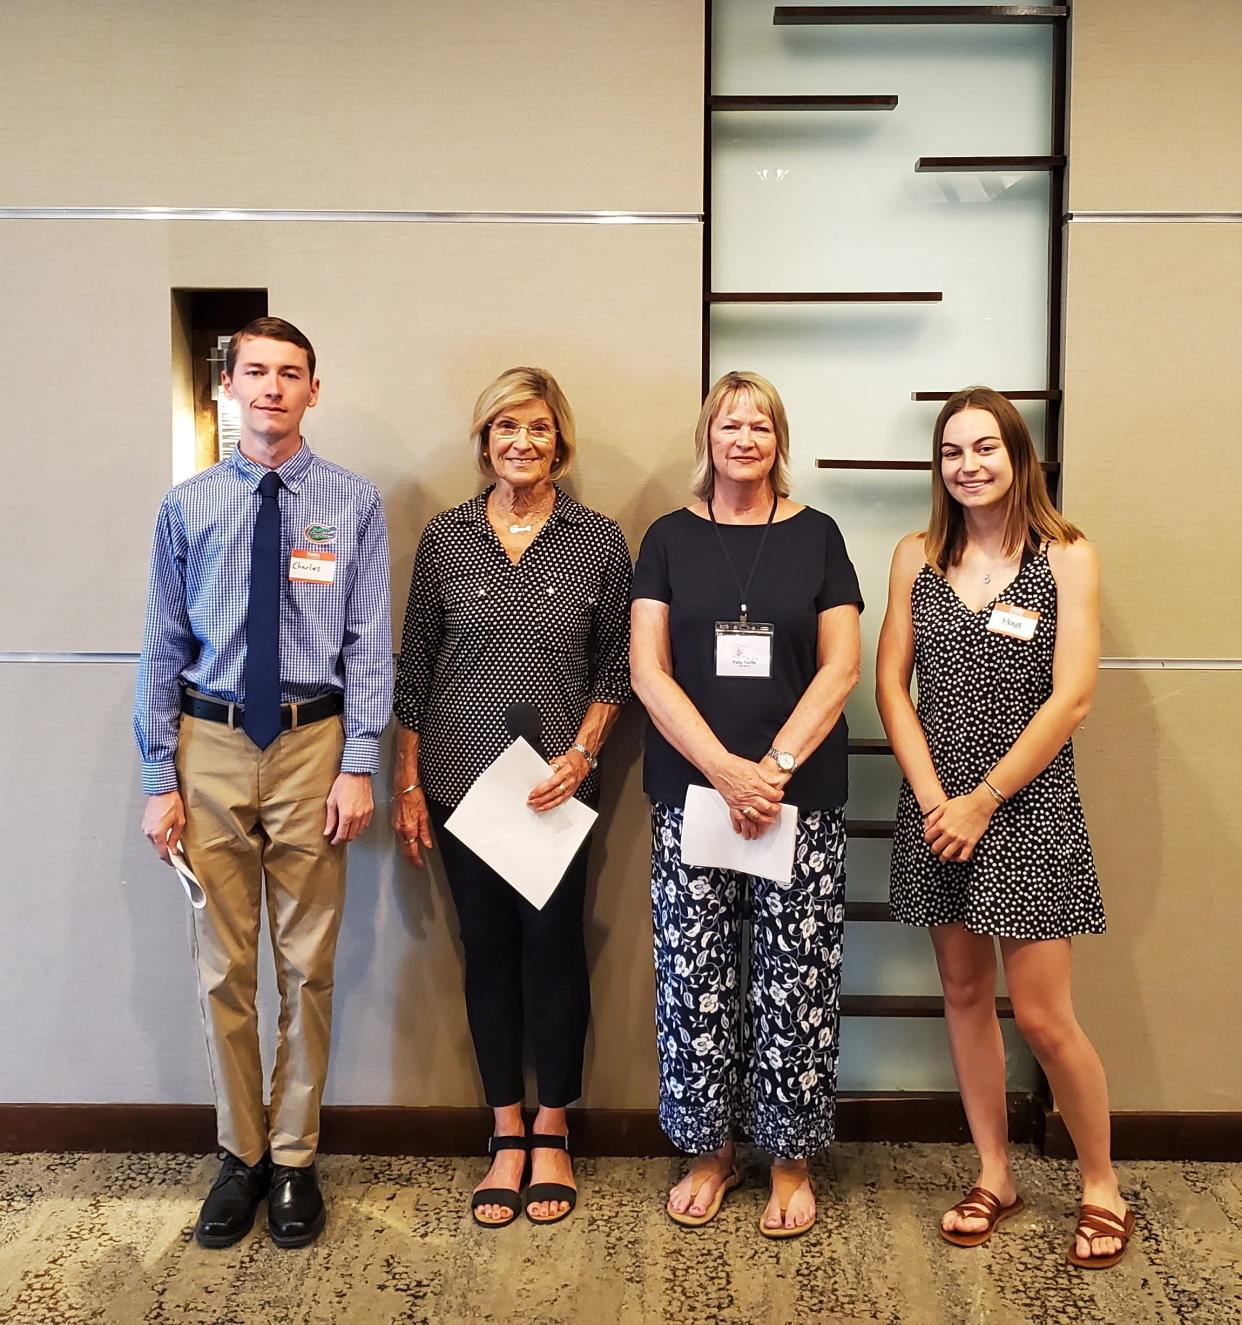 The Sarasota Orchid Society recently awarded their Monroe Kokin scholarships to Maya Lander and Charles Foster.